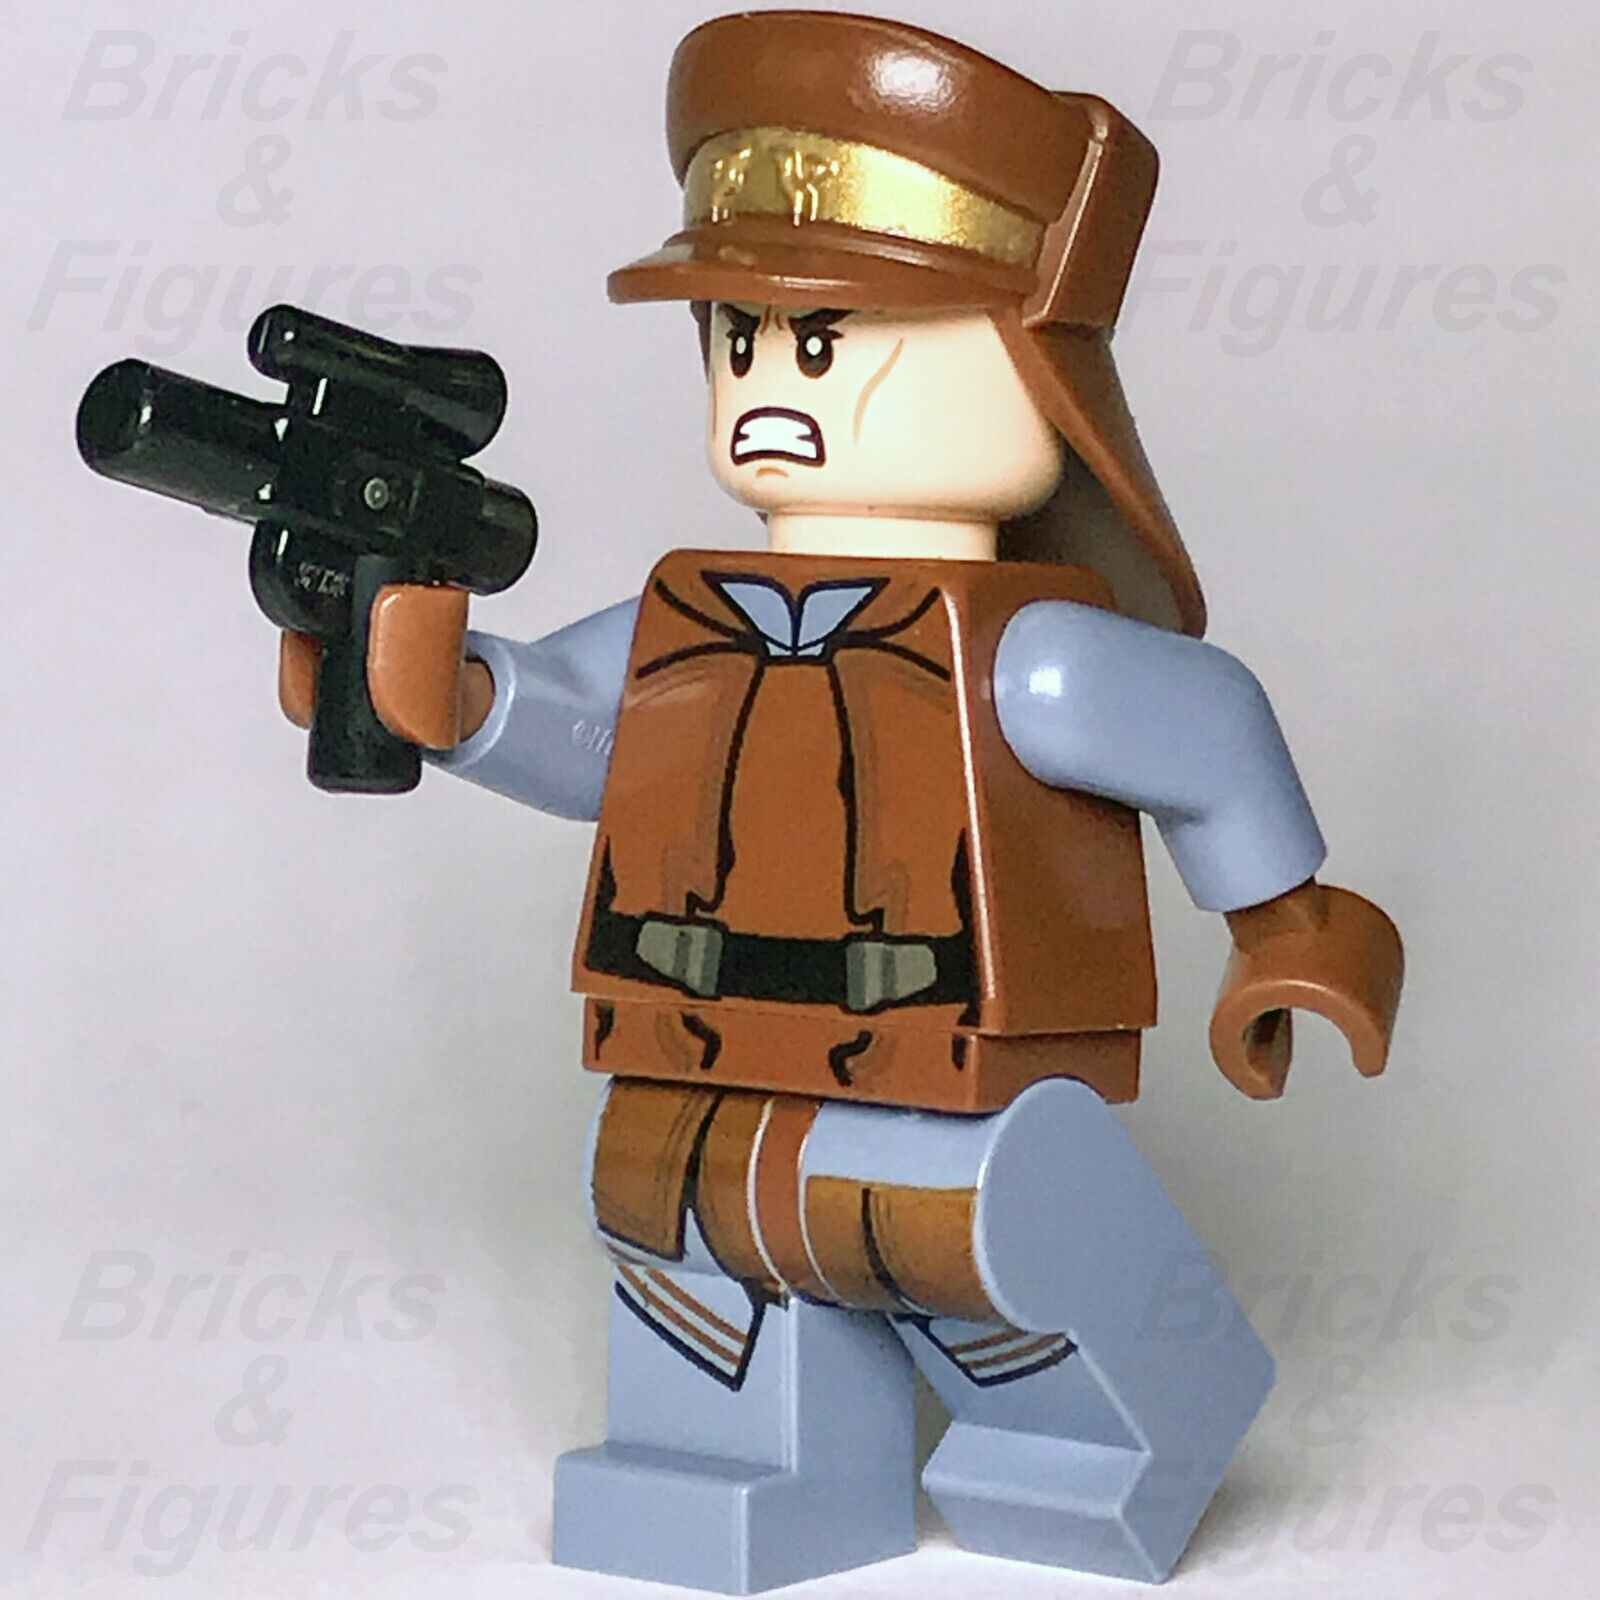 LEGO Star Wars Naboo Security Officer Minifigure Episode 1 75091 sw0638 Minifig